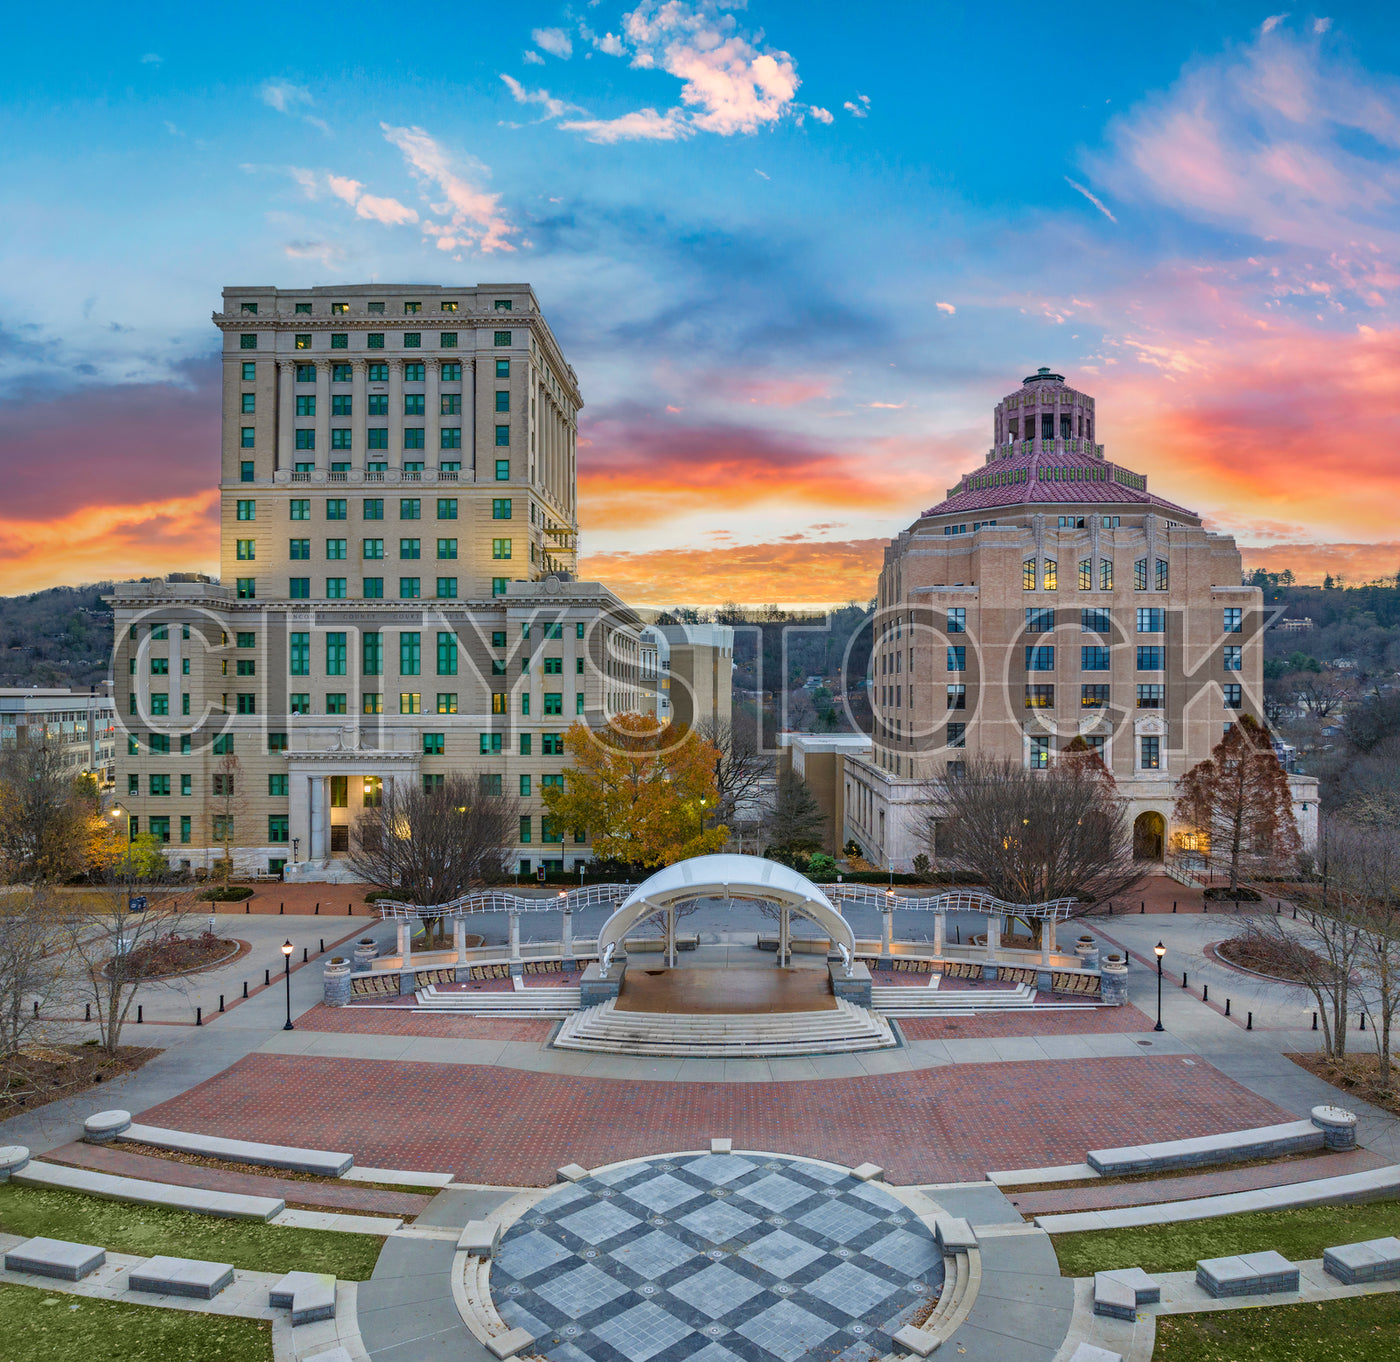 Sunset over Asheville City Hall and Buncombe County Courthouse